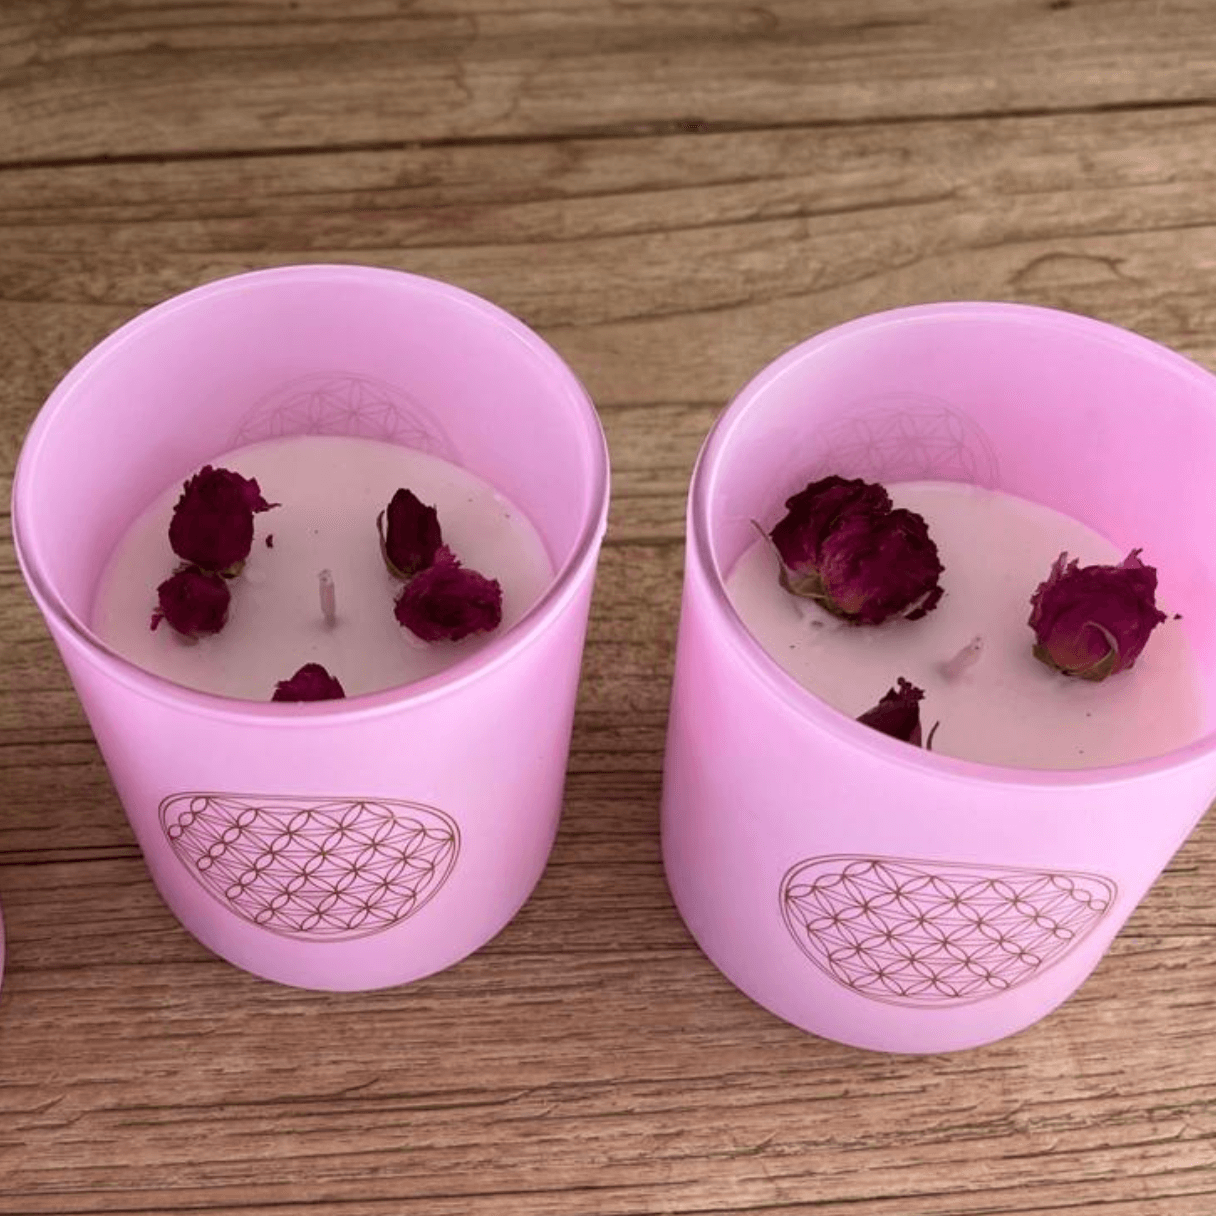 "Antistress" candle with the scent of roses in a pink glass with a wooden lid